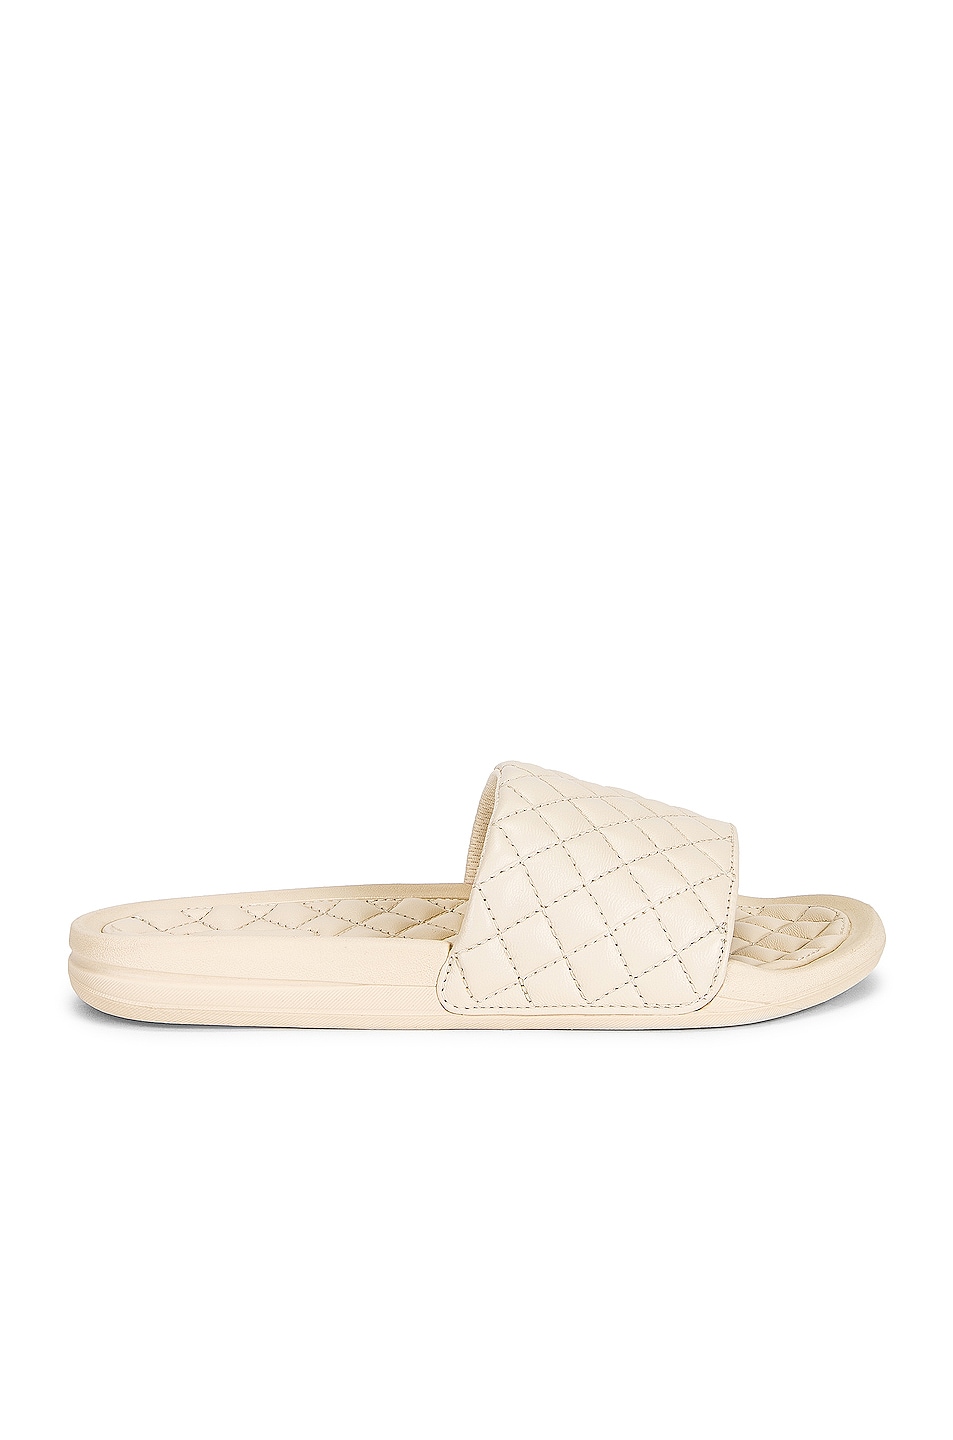 Image 1 of APL: Athletic Propulsion Labs Lusso Slide Sandal in Parchment